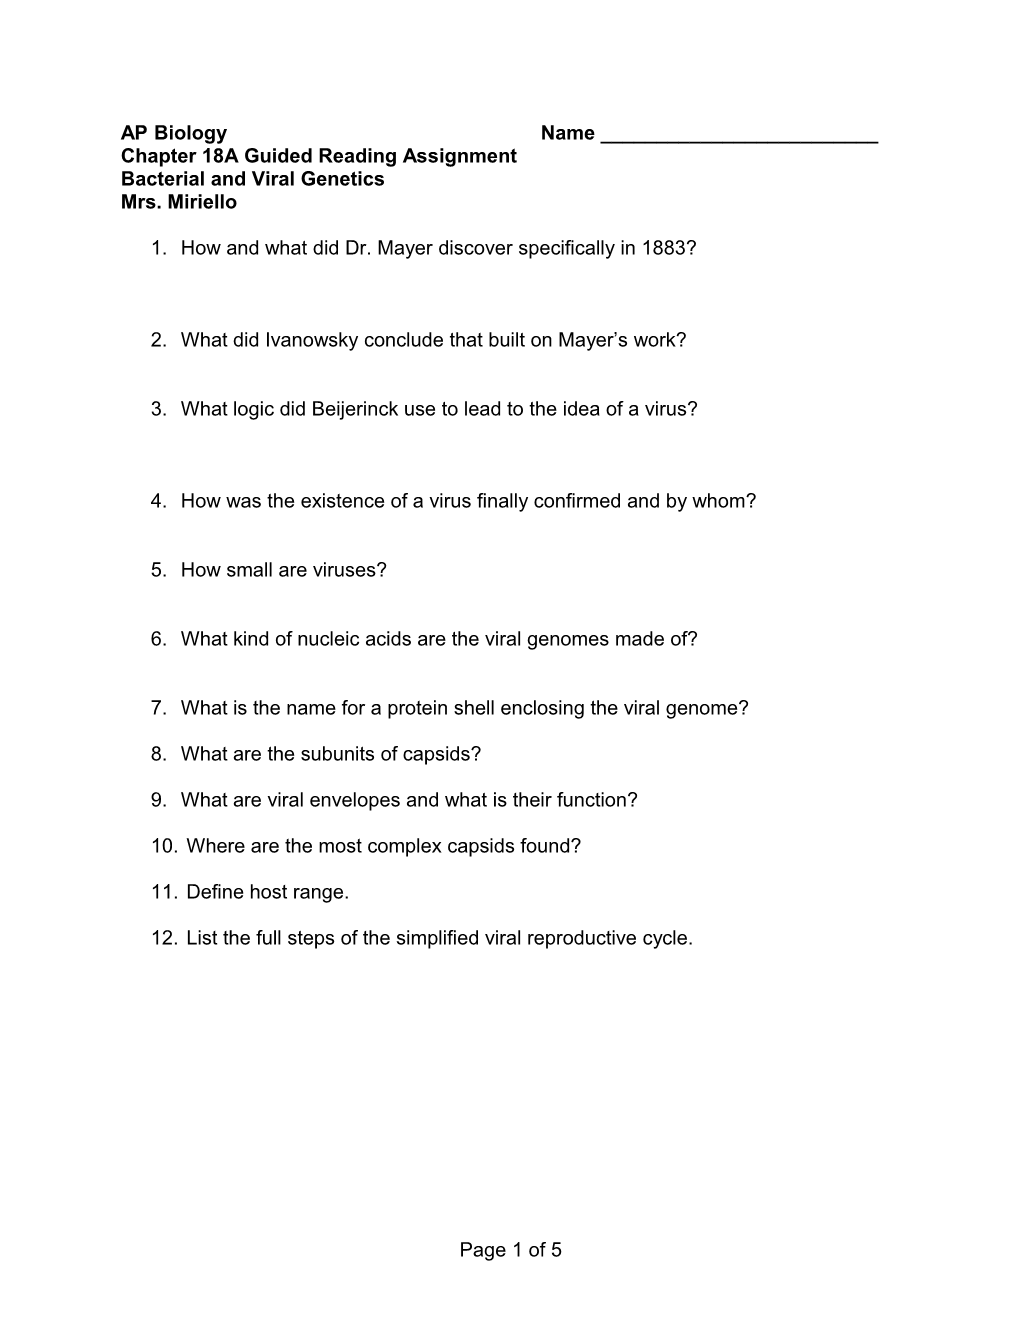 Chapter 18A Guided Reading Assignment